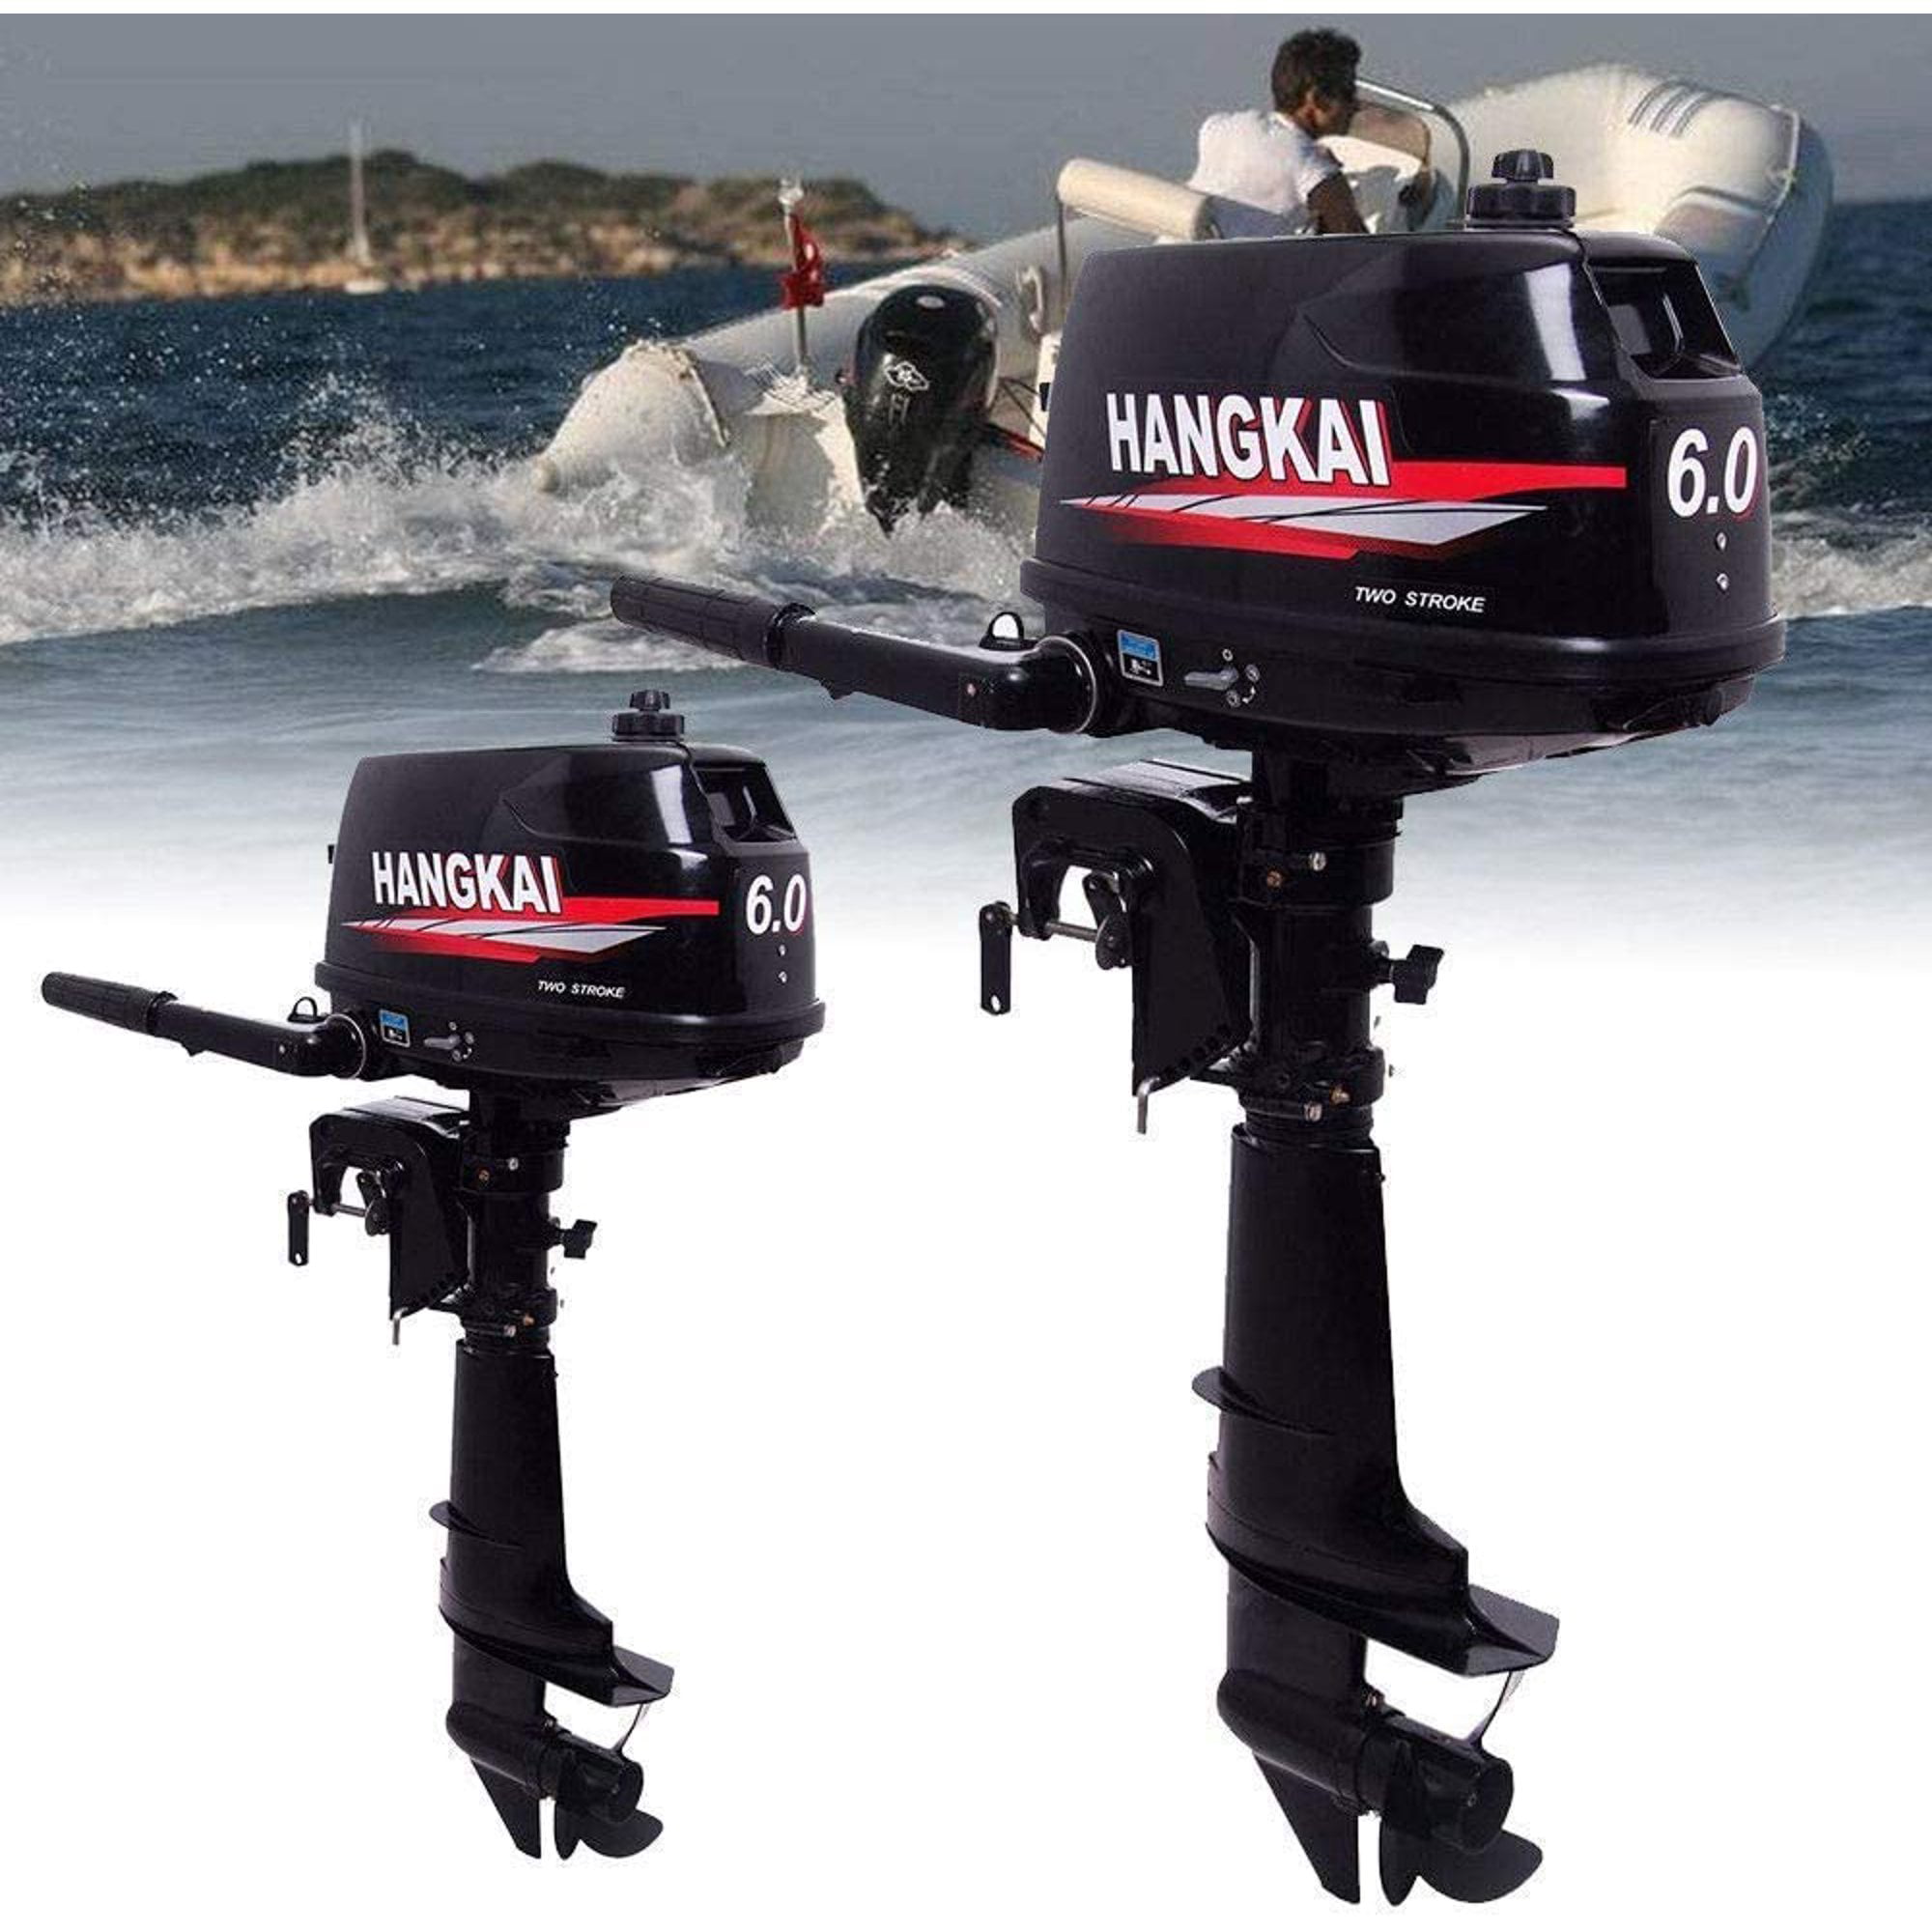 HANGKAI 2 Stroke Outboard Motor 2500W Fishing Boat Engine with CDI System 3.5HP 